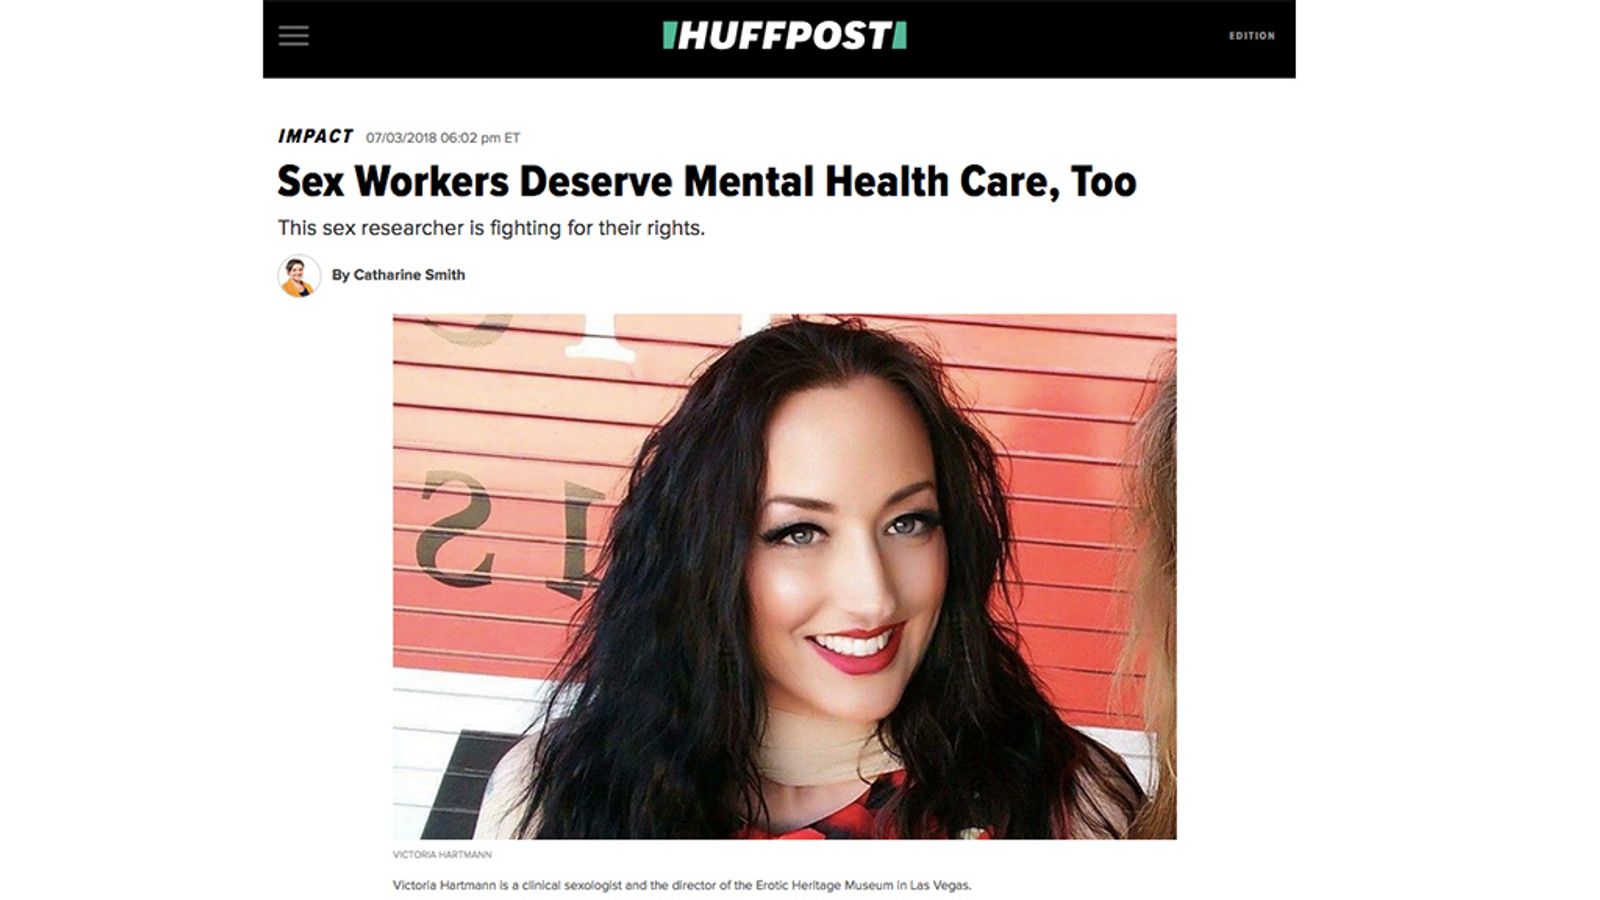 Dr. Victoria Hartmann Interviewed by HuffPo on Sex Worker Rights